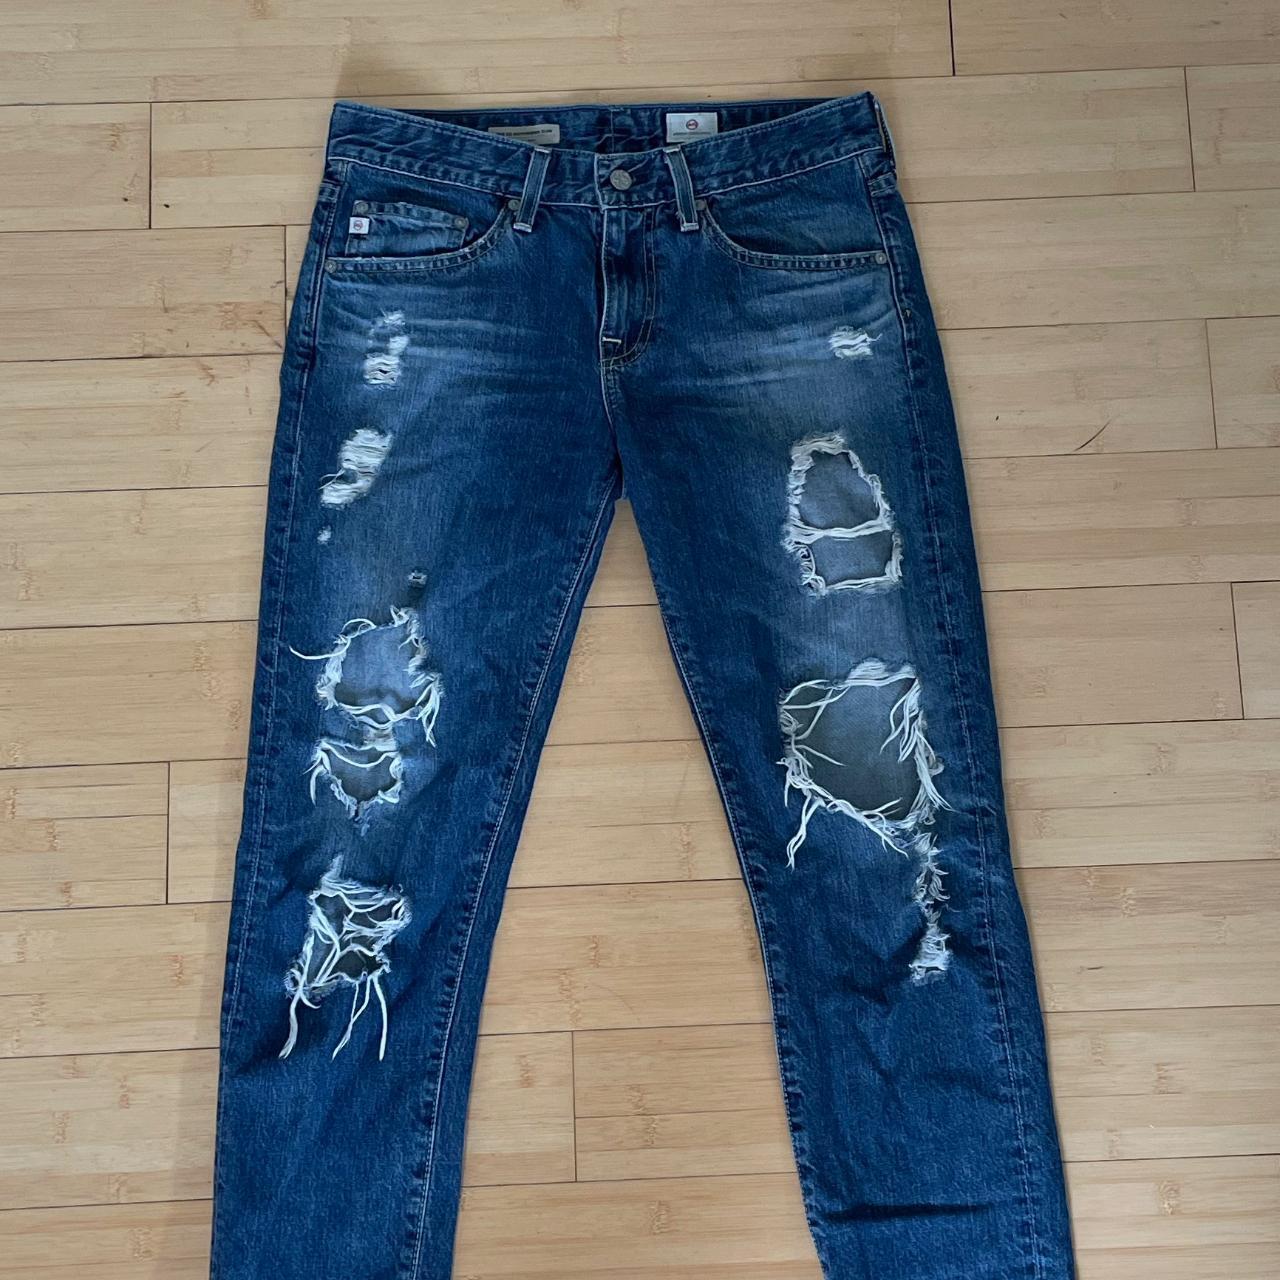 AG Jeans Women's Navy and Blue Jeans | Depop